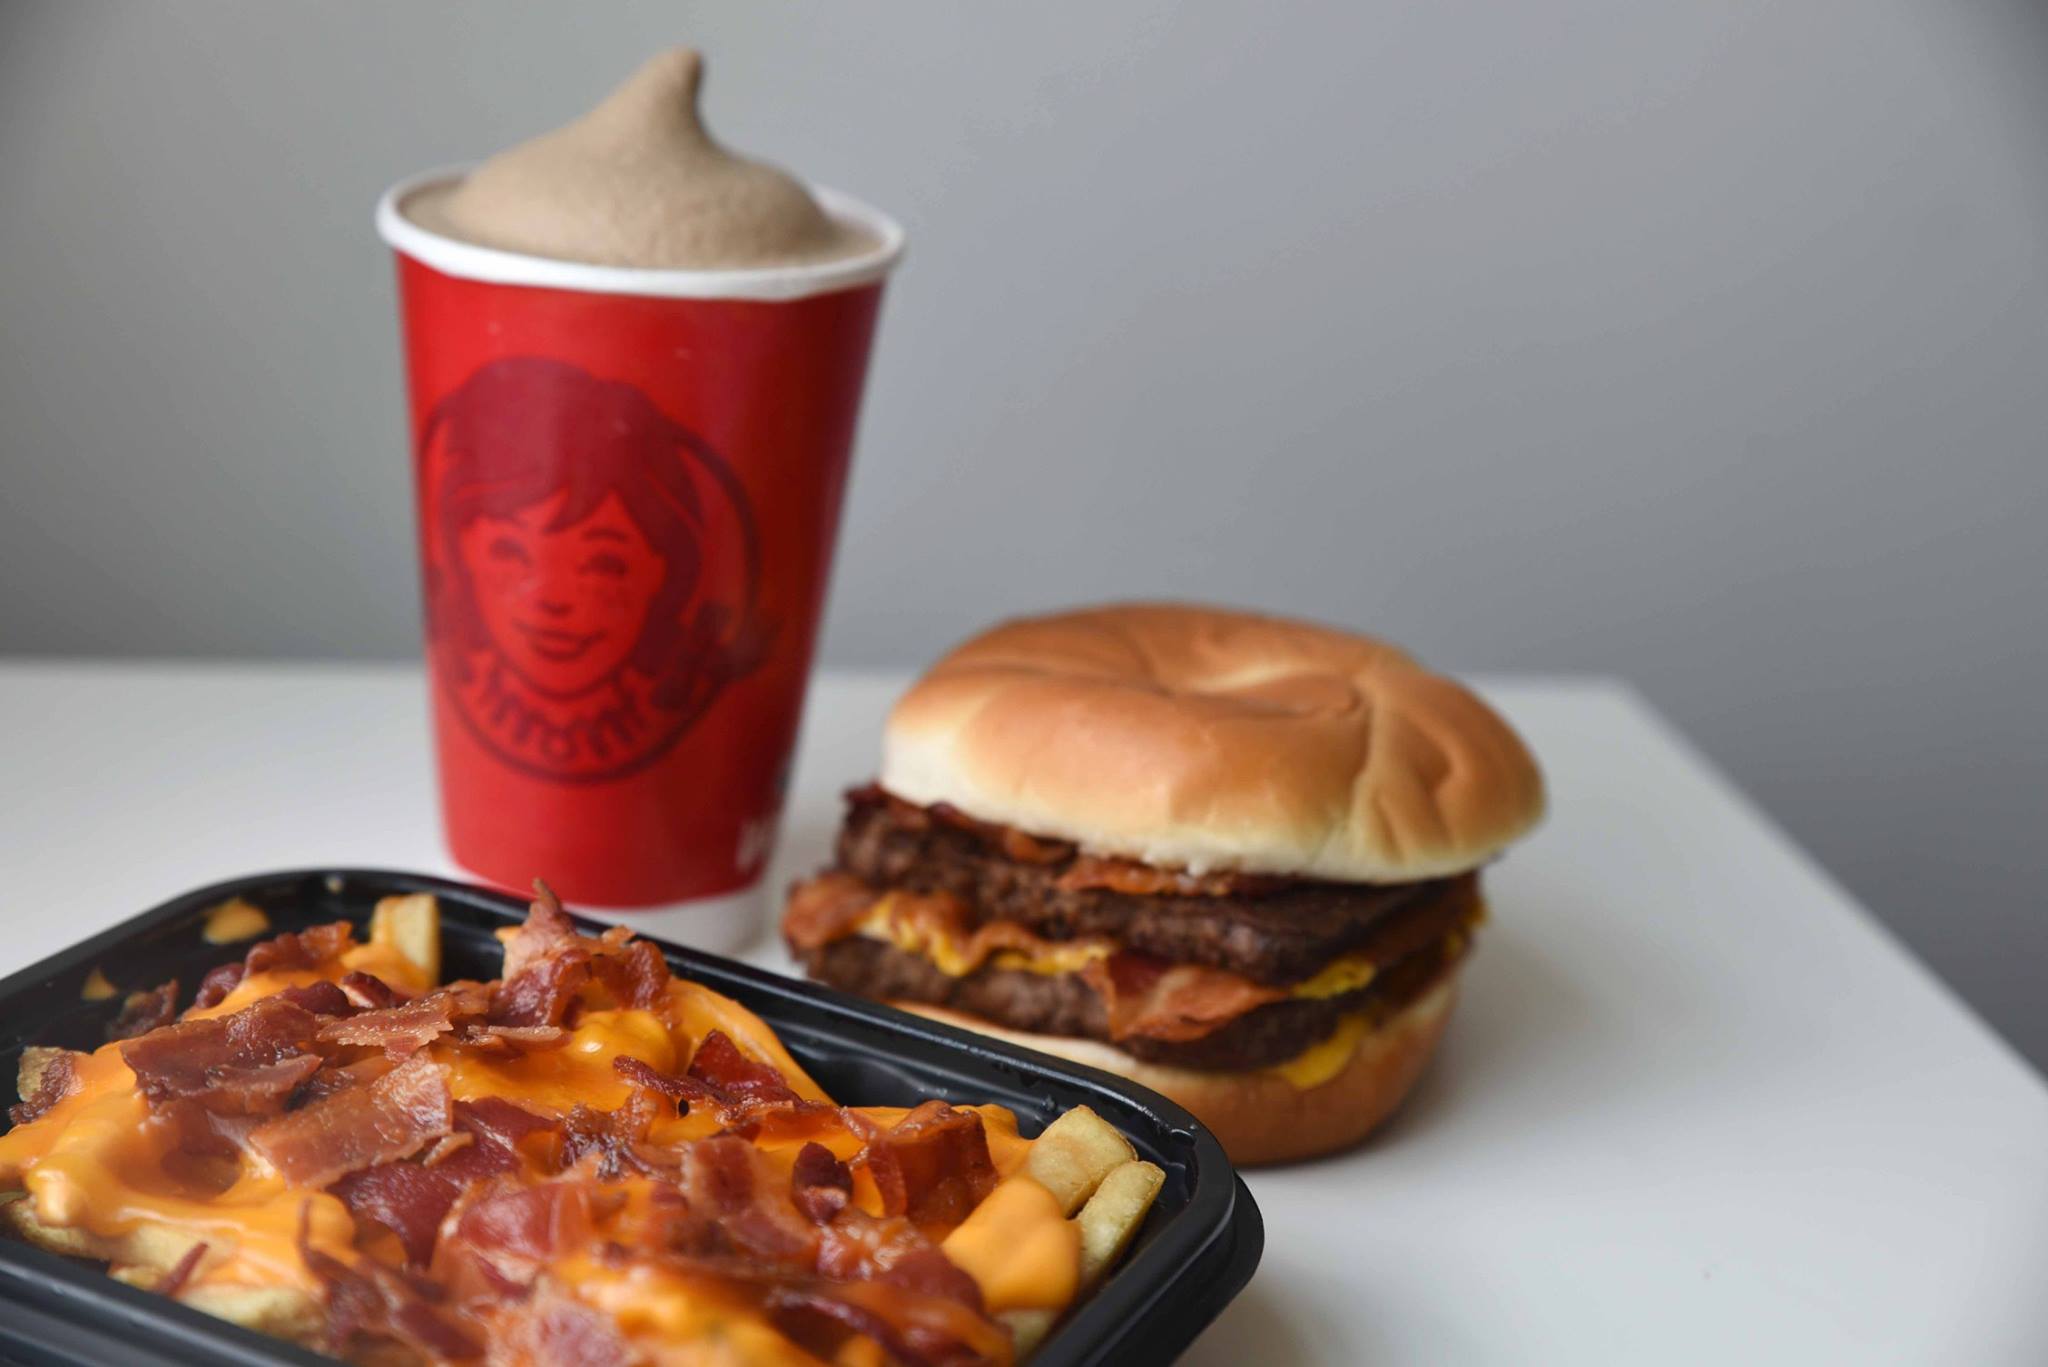 Wendy's: Get FREE Baconator fries with any purchase via app